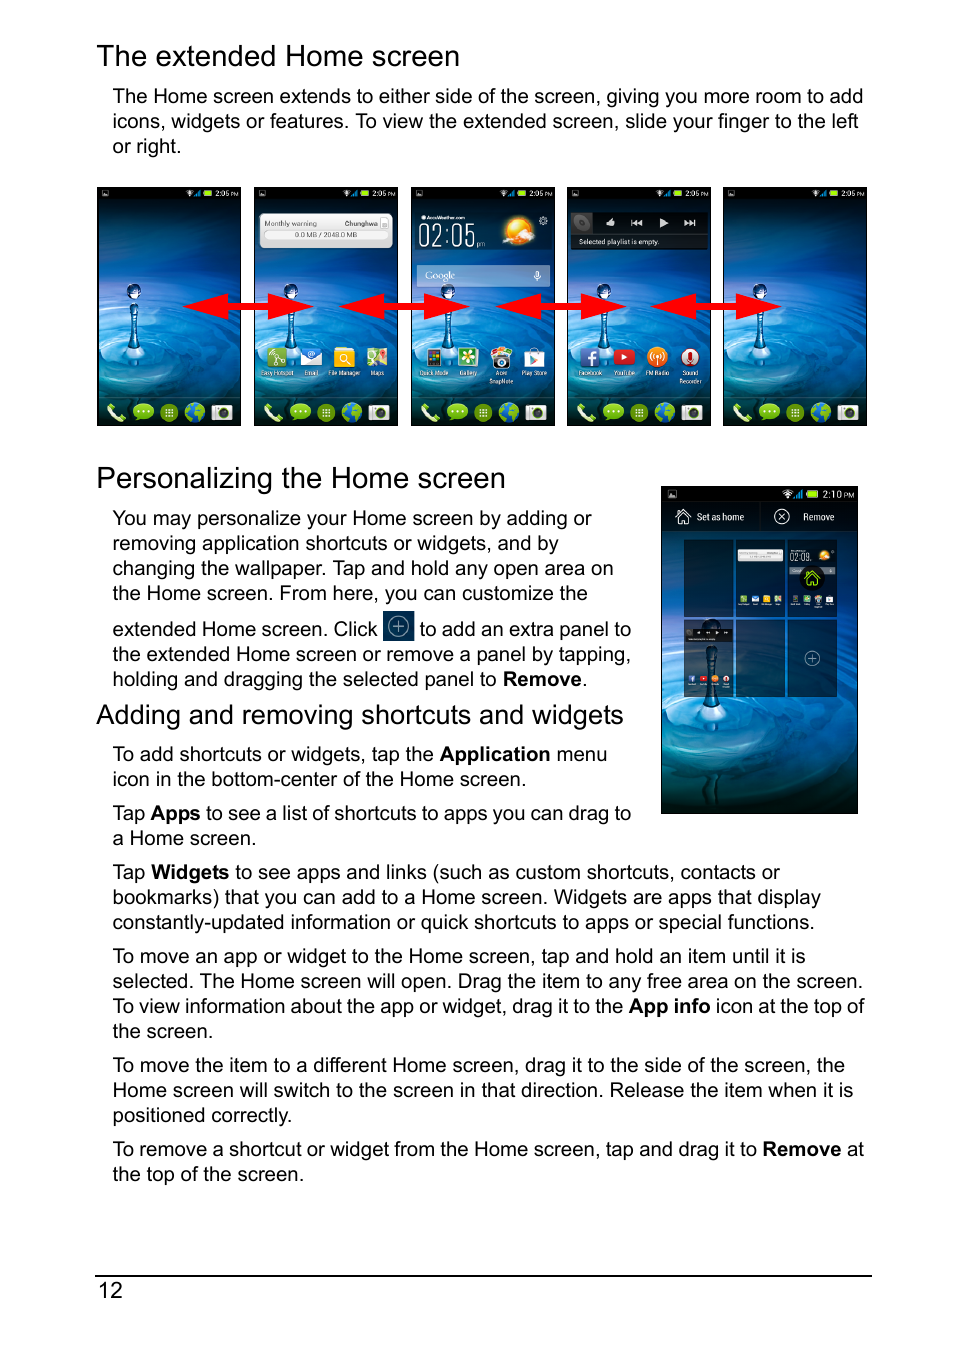 The extended home screen, Personalizing the home screen, Adding and